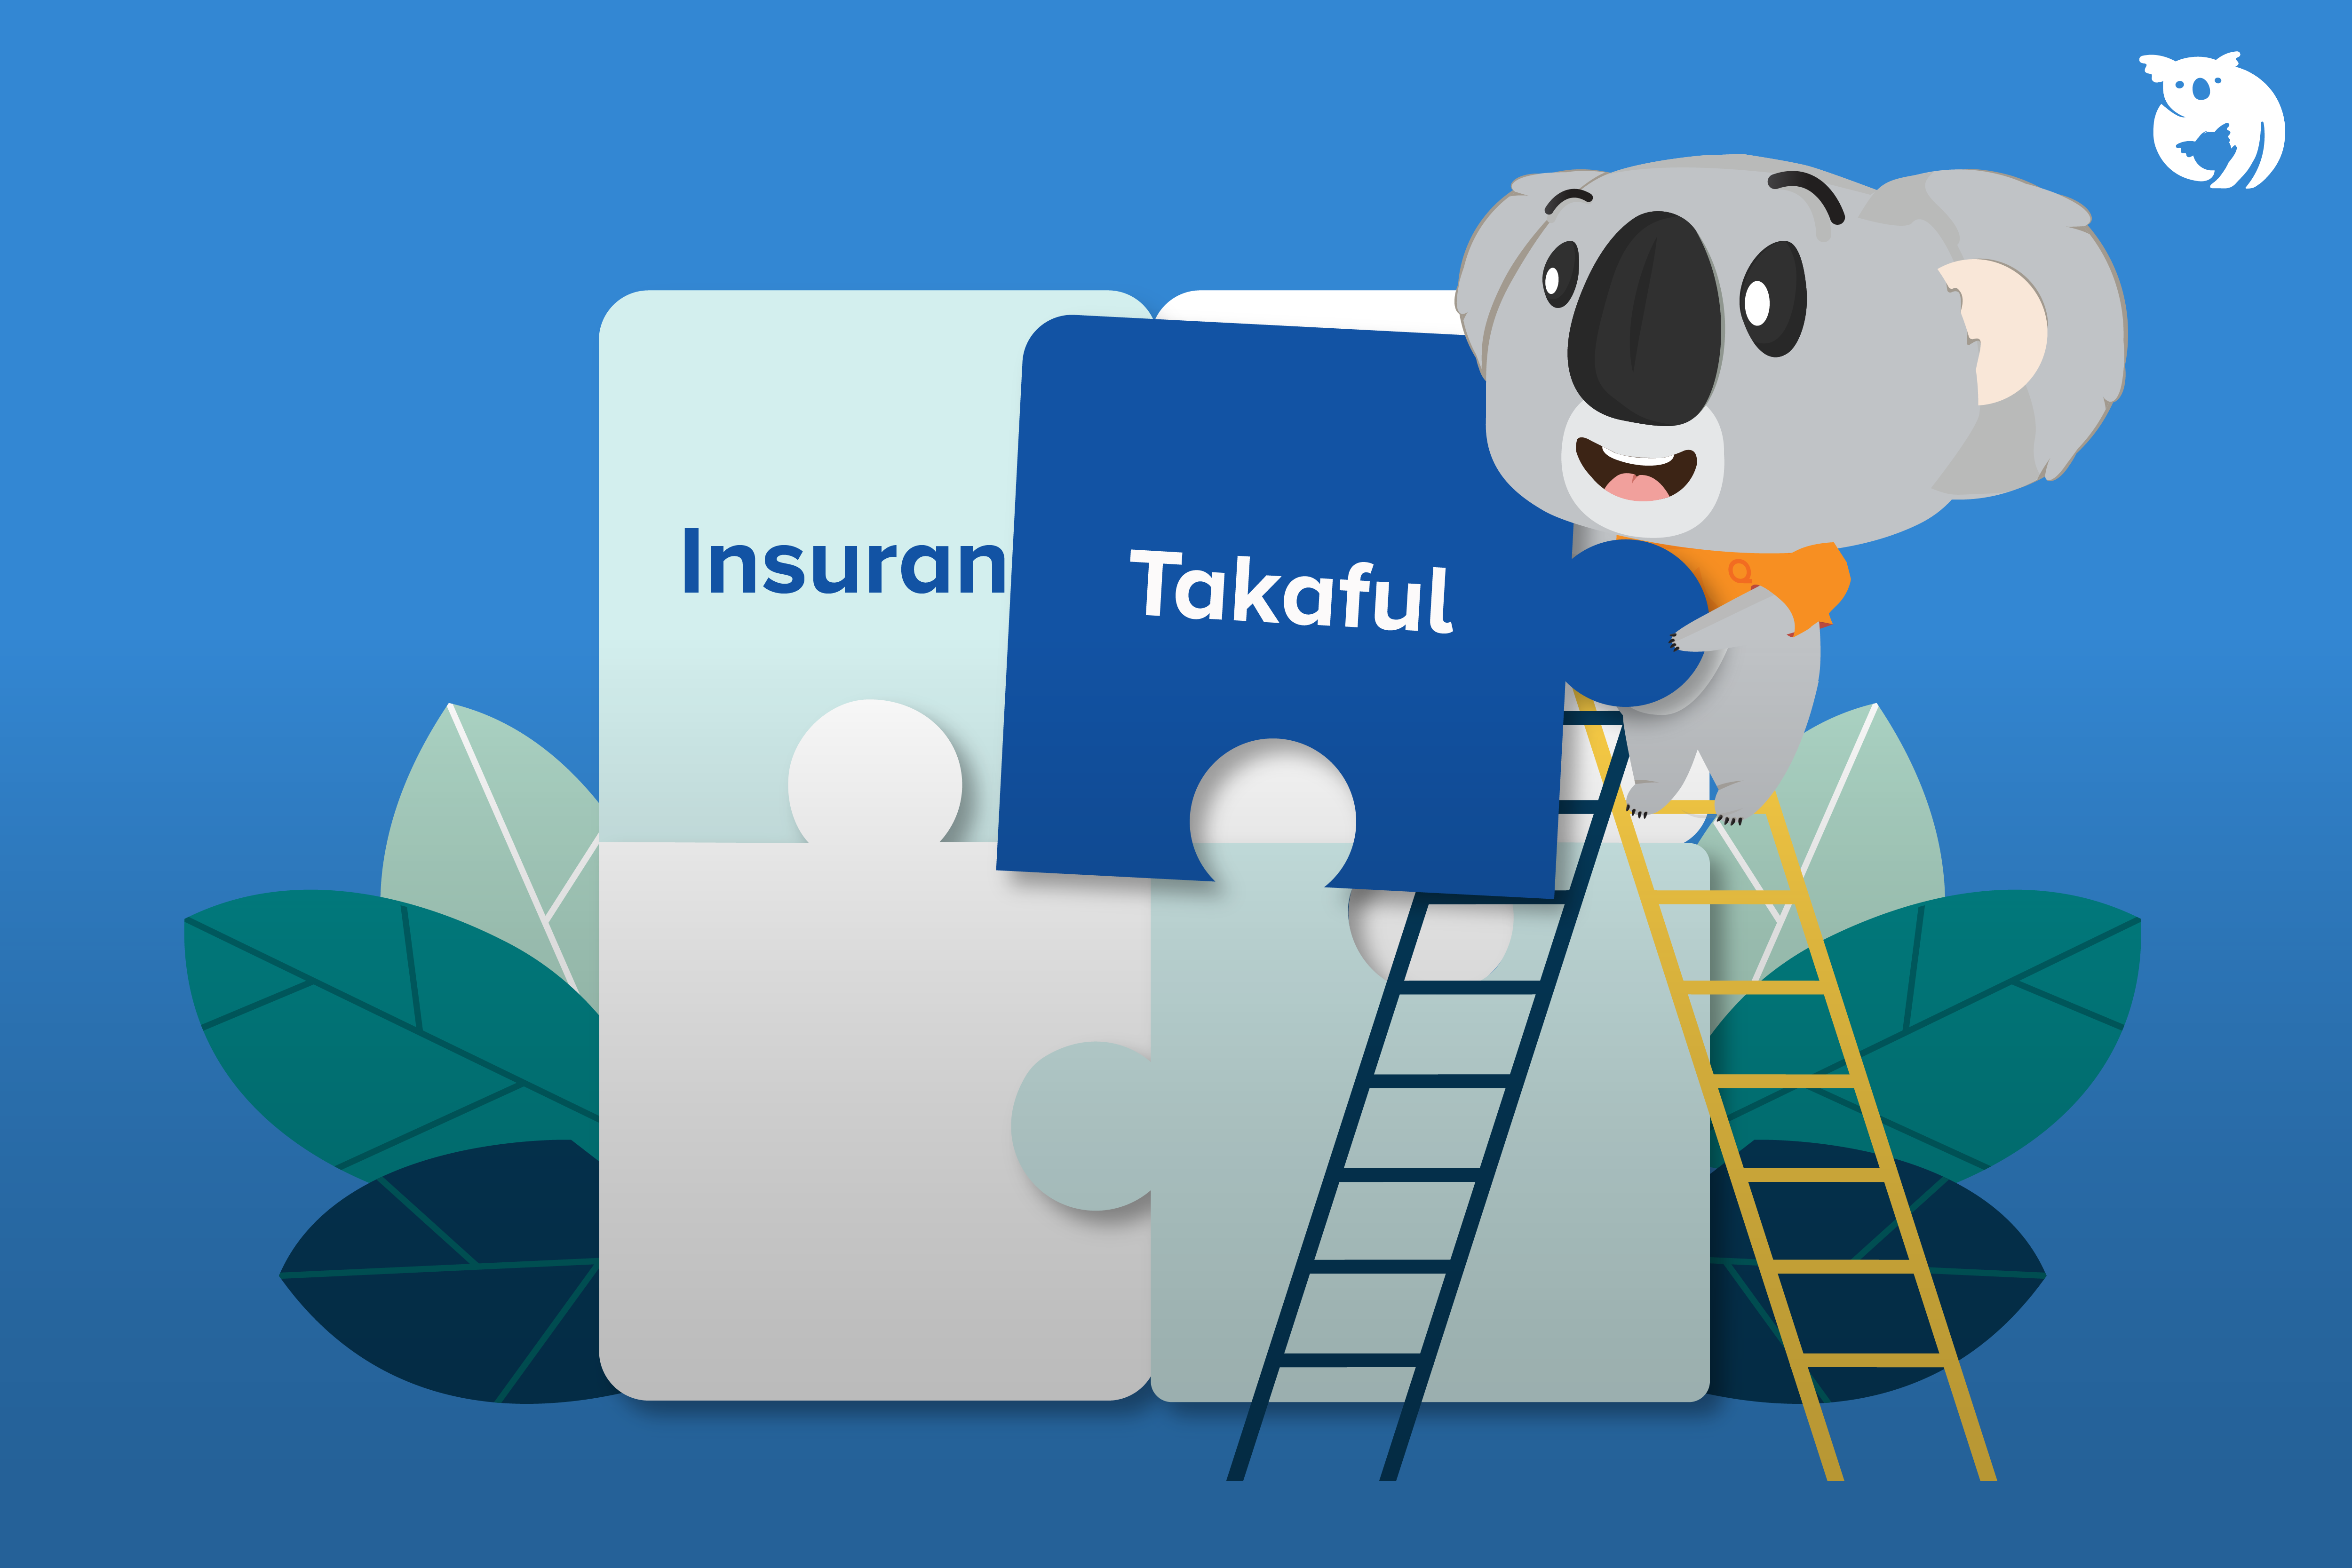 Insurance vs Takaful: Which One Should You Choose?